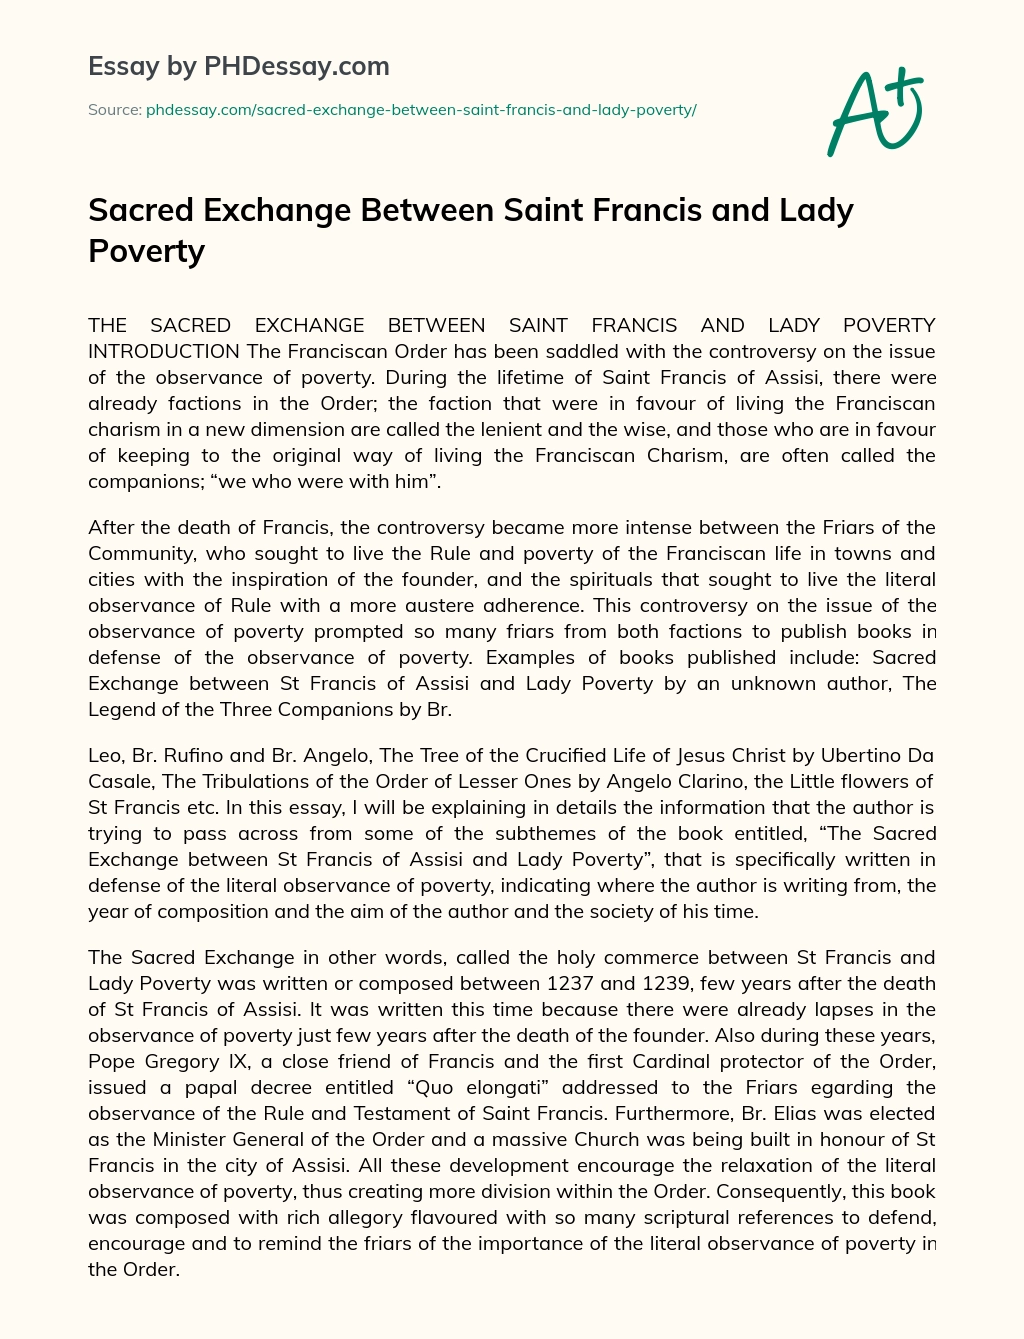 The Sacred Exchange Between Saint Francis and Lady Poverty essay